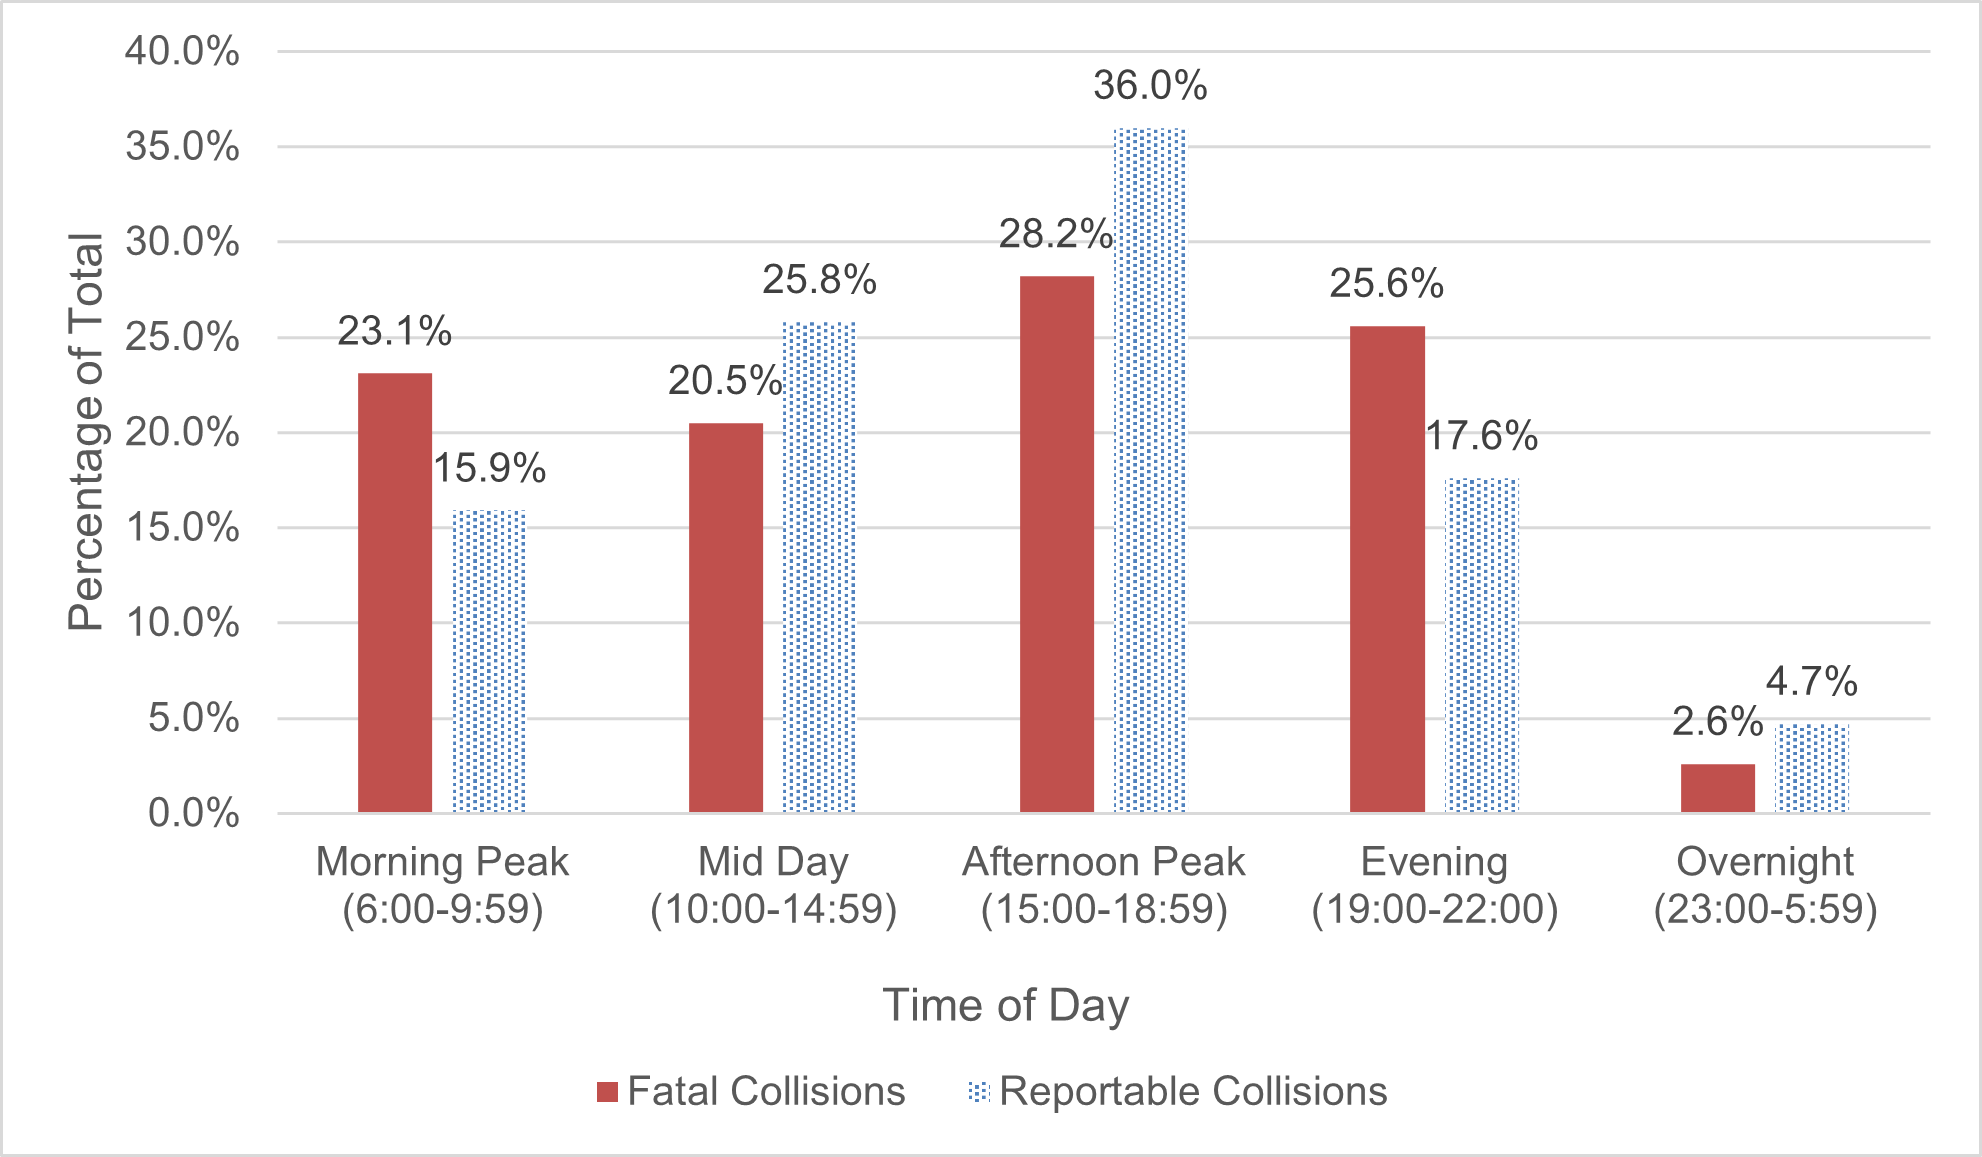 Figure Nine demonstrates the number of fatal collisions versus reportable collisions by time of day involving vulnerable road users. 